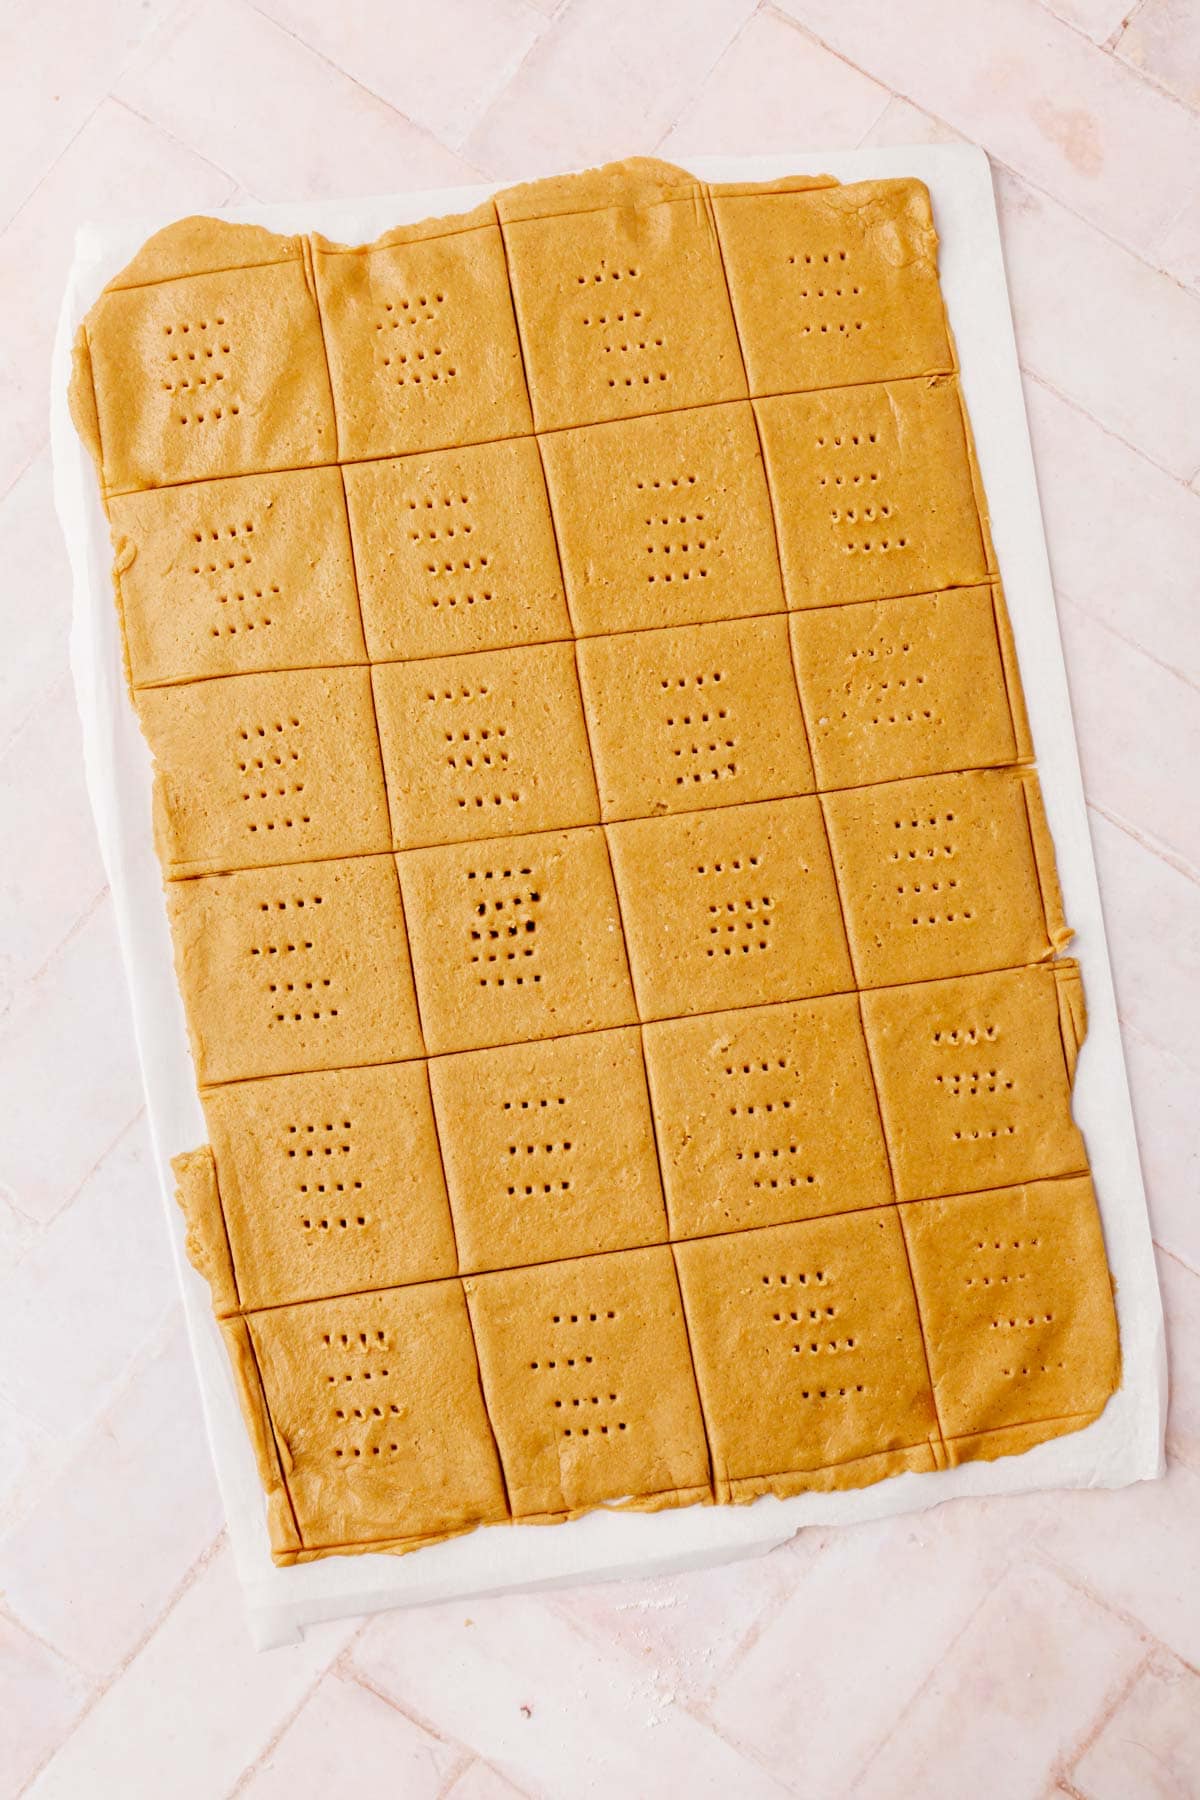 Graham cracker dough cut into squares with fork holes on a piece of parchment paper.